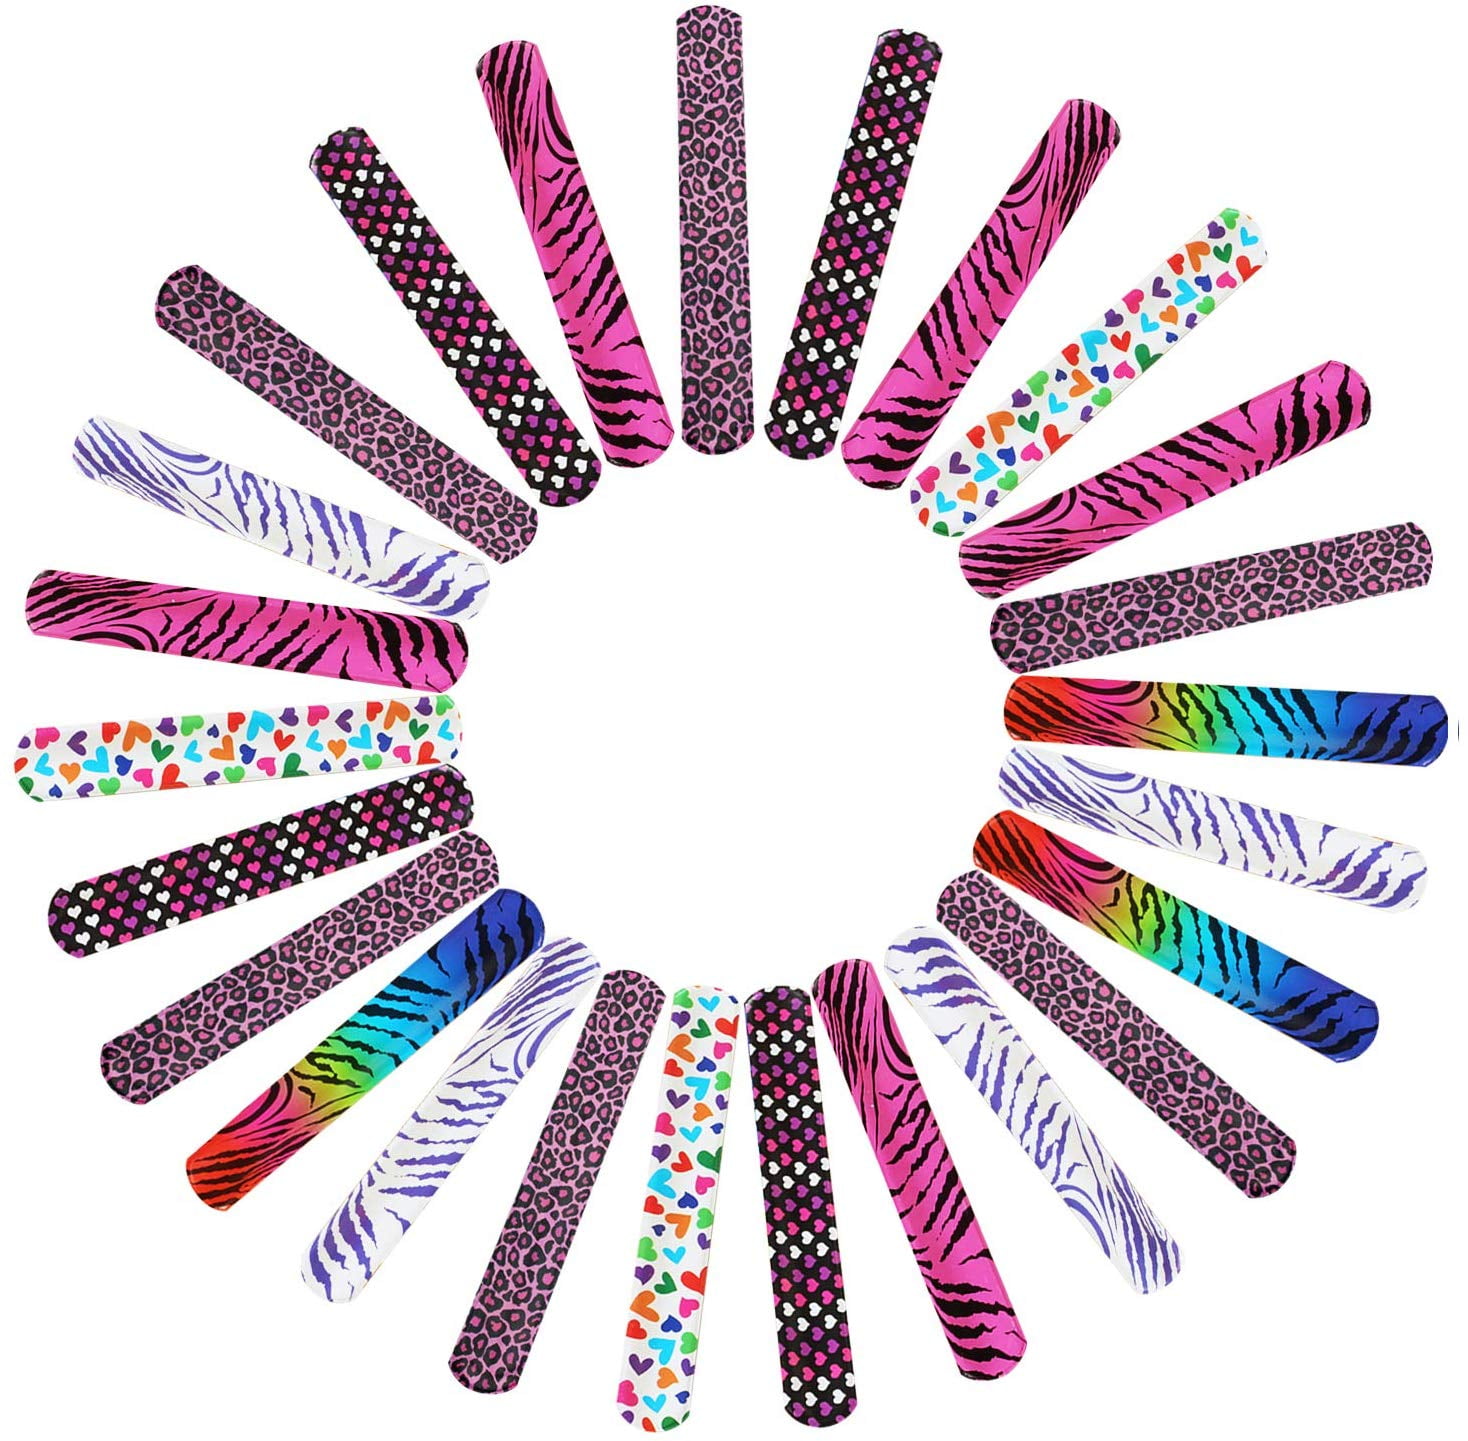 Assorted Pattern for party supplies 6pcs Children Slap Bracelet Soft Alpaca Wristbands Decoration Kids Silicone Bracelet for Gifts Birthday Party and School Rewards 